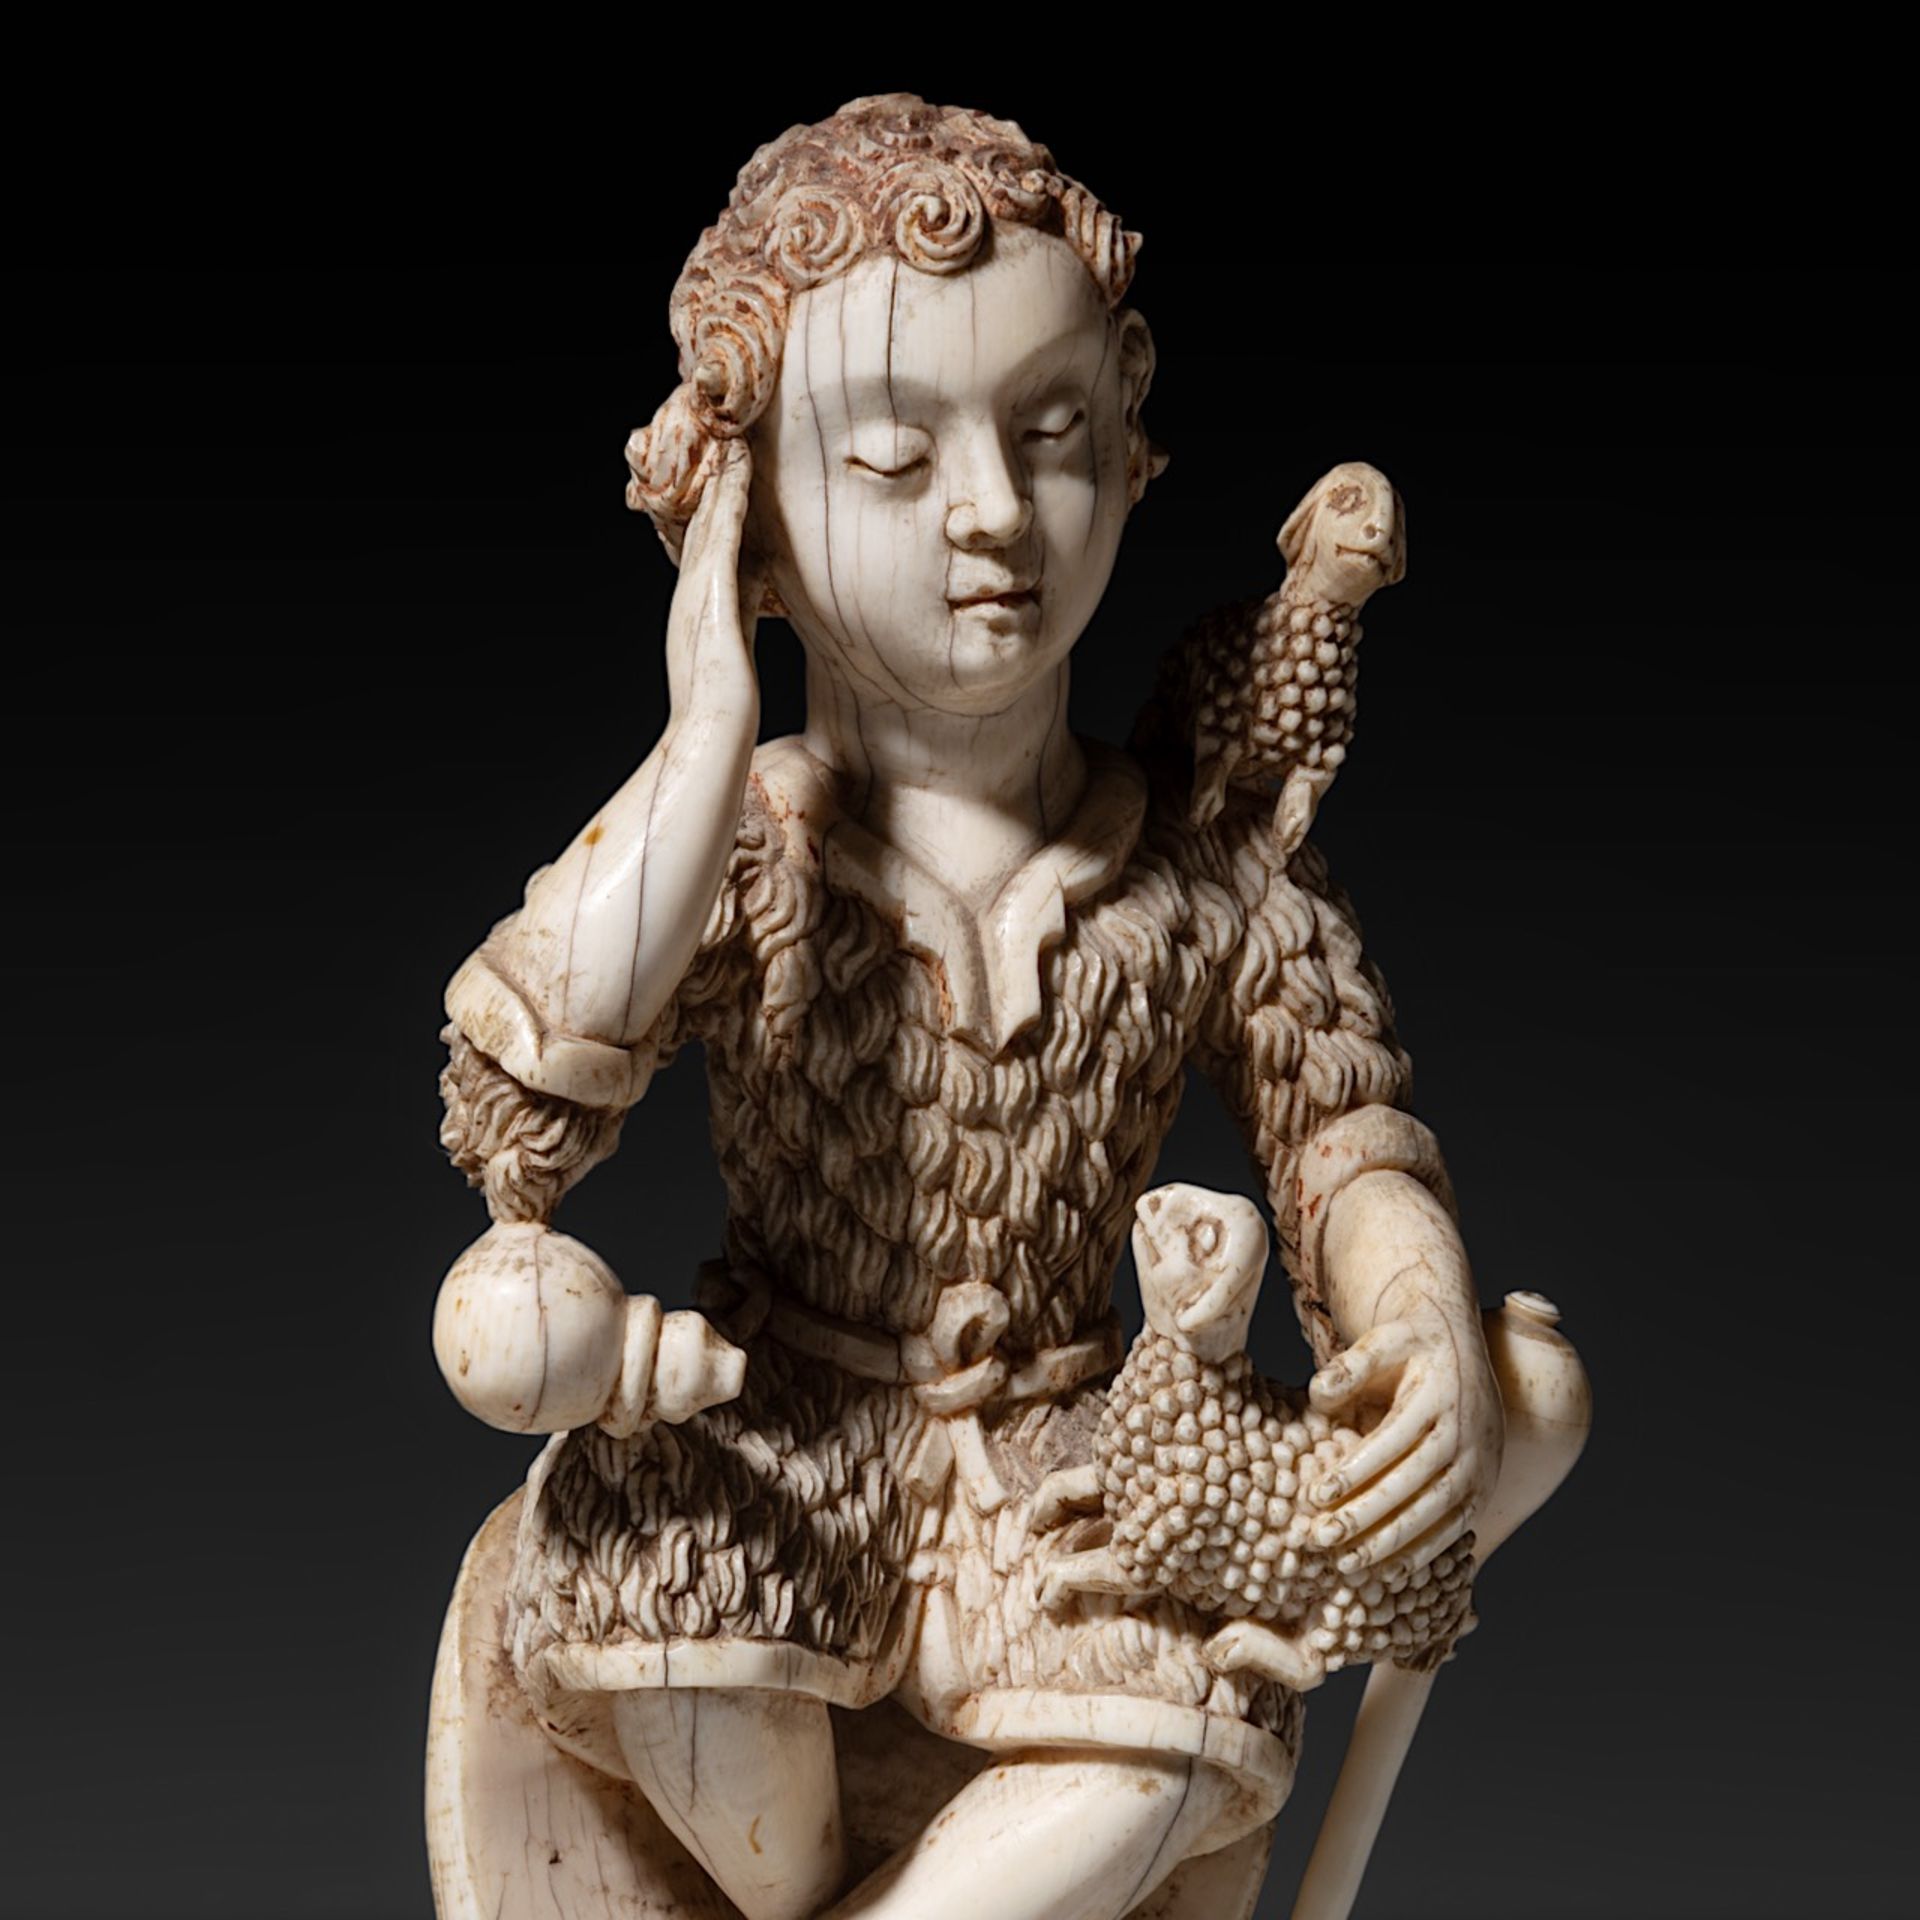 A large 17th-18thC Goa ivory carving of Christ represented as the Good Shepherd, ivory H 22,5 cm - t - Image 7 of 8